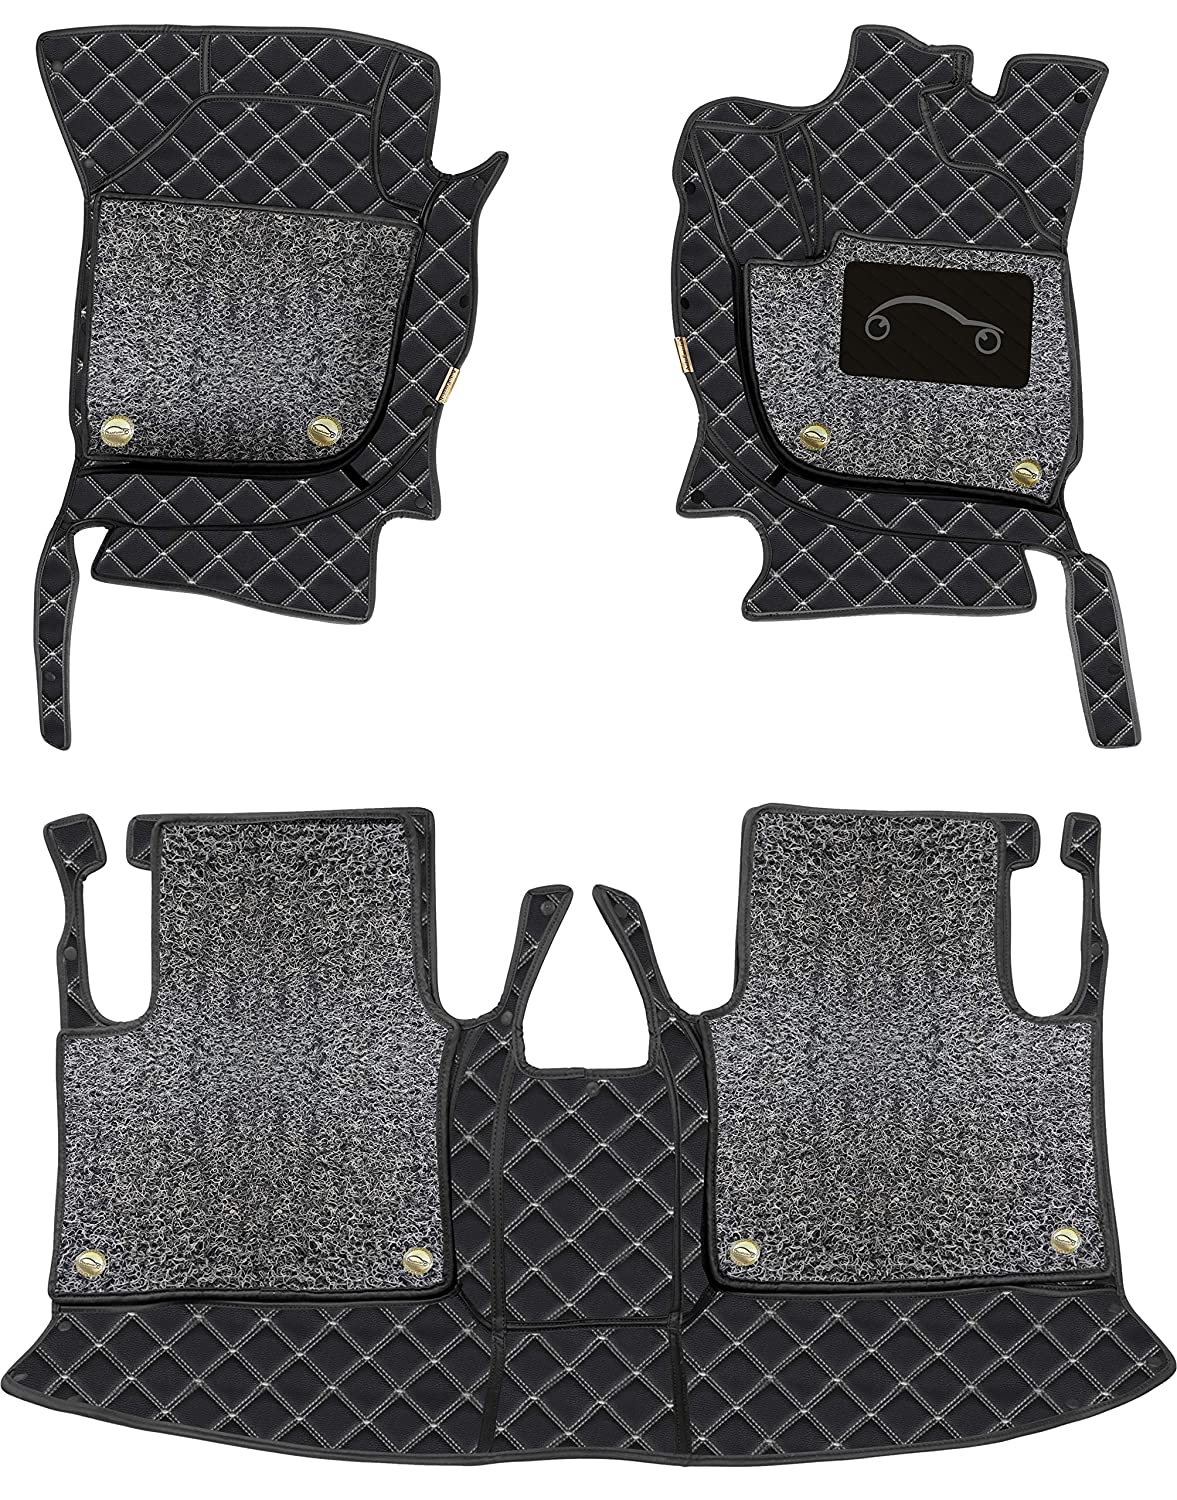 Land Rover Defender 130 2023-7D Luxury Car Mat, All Weather Proof, Anti-Skid, 100% Waterproof & Odorless with Unique Diamond Fish Design (24mm Luxury PU Leather, 2 Rows)